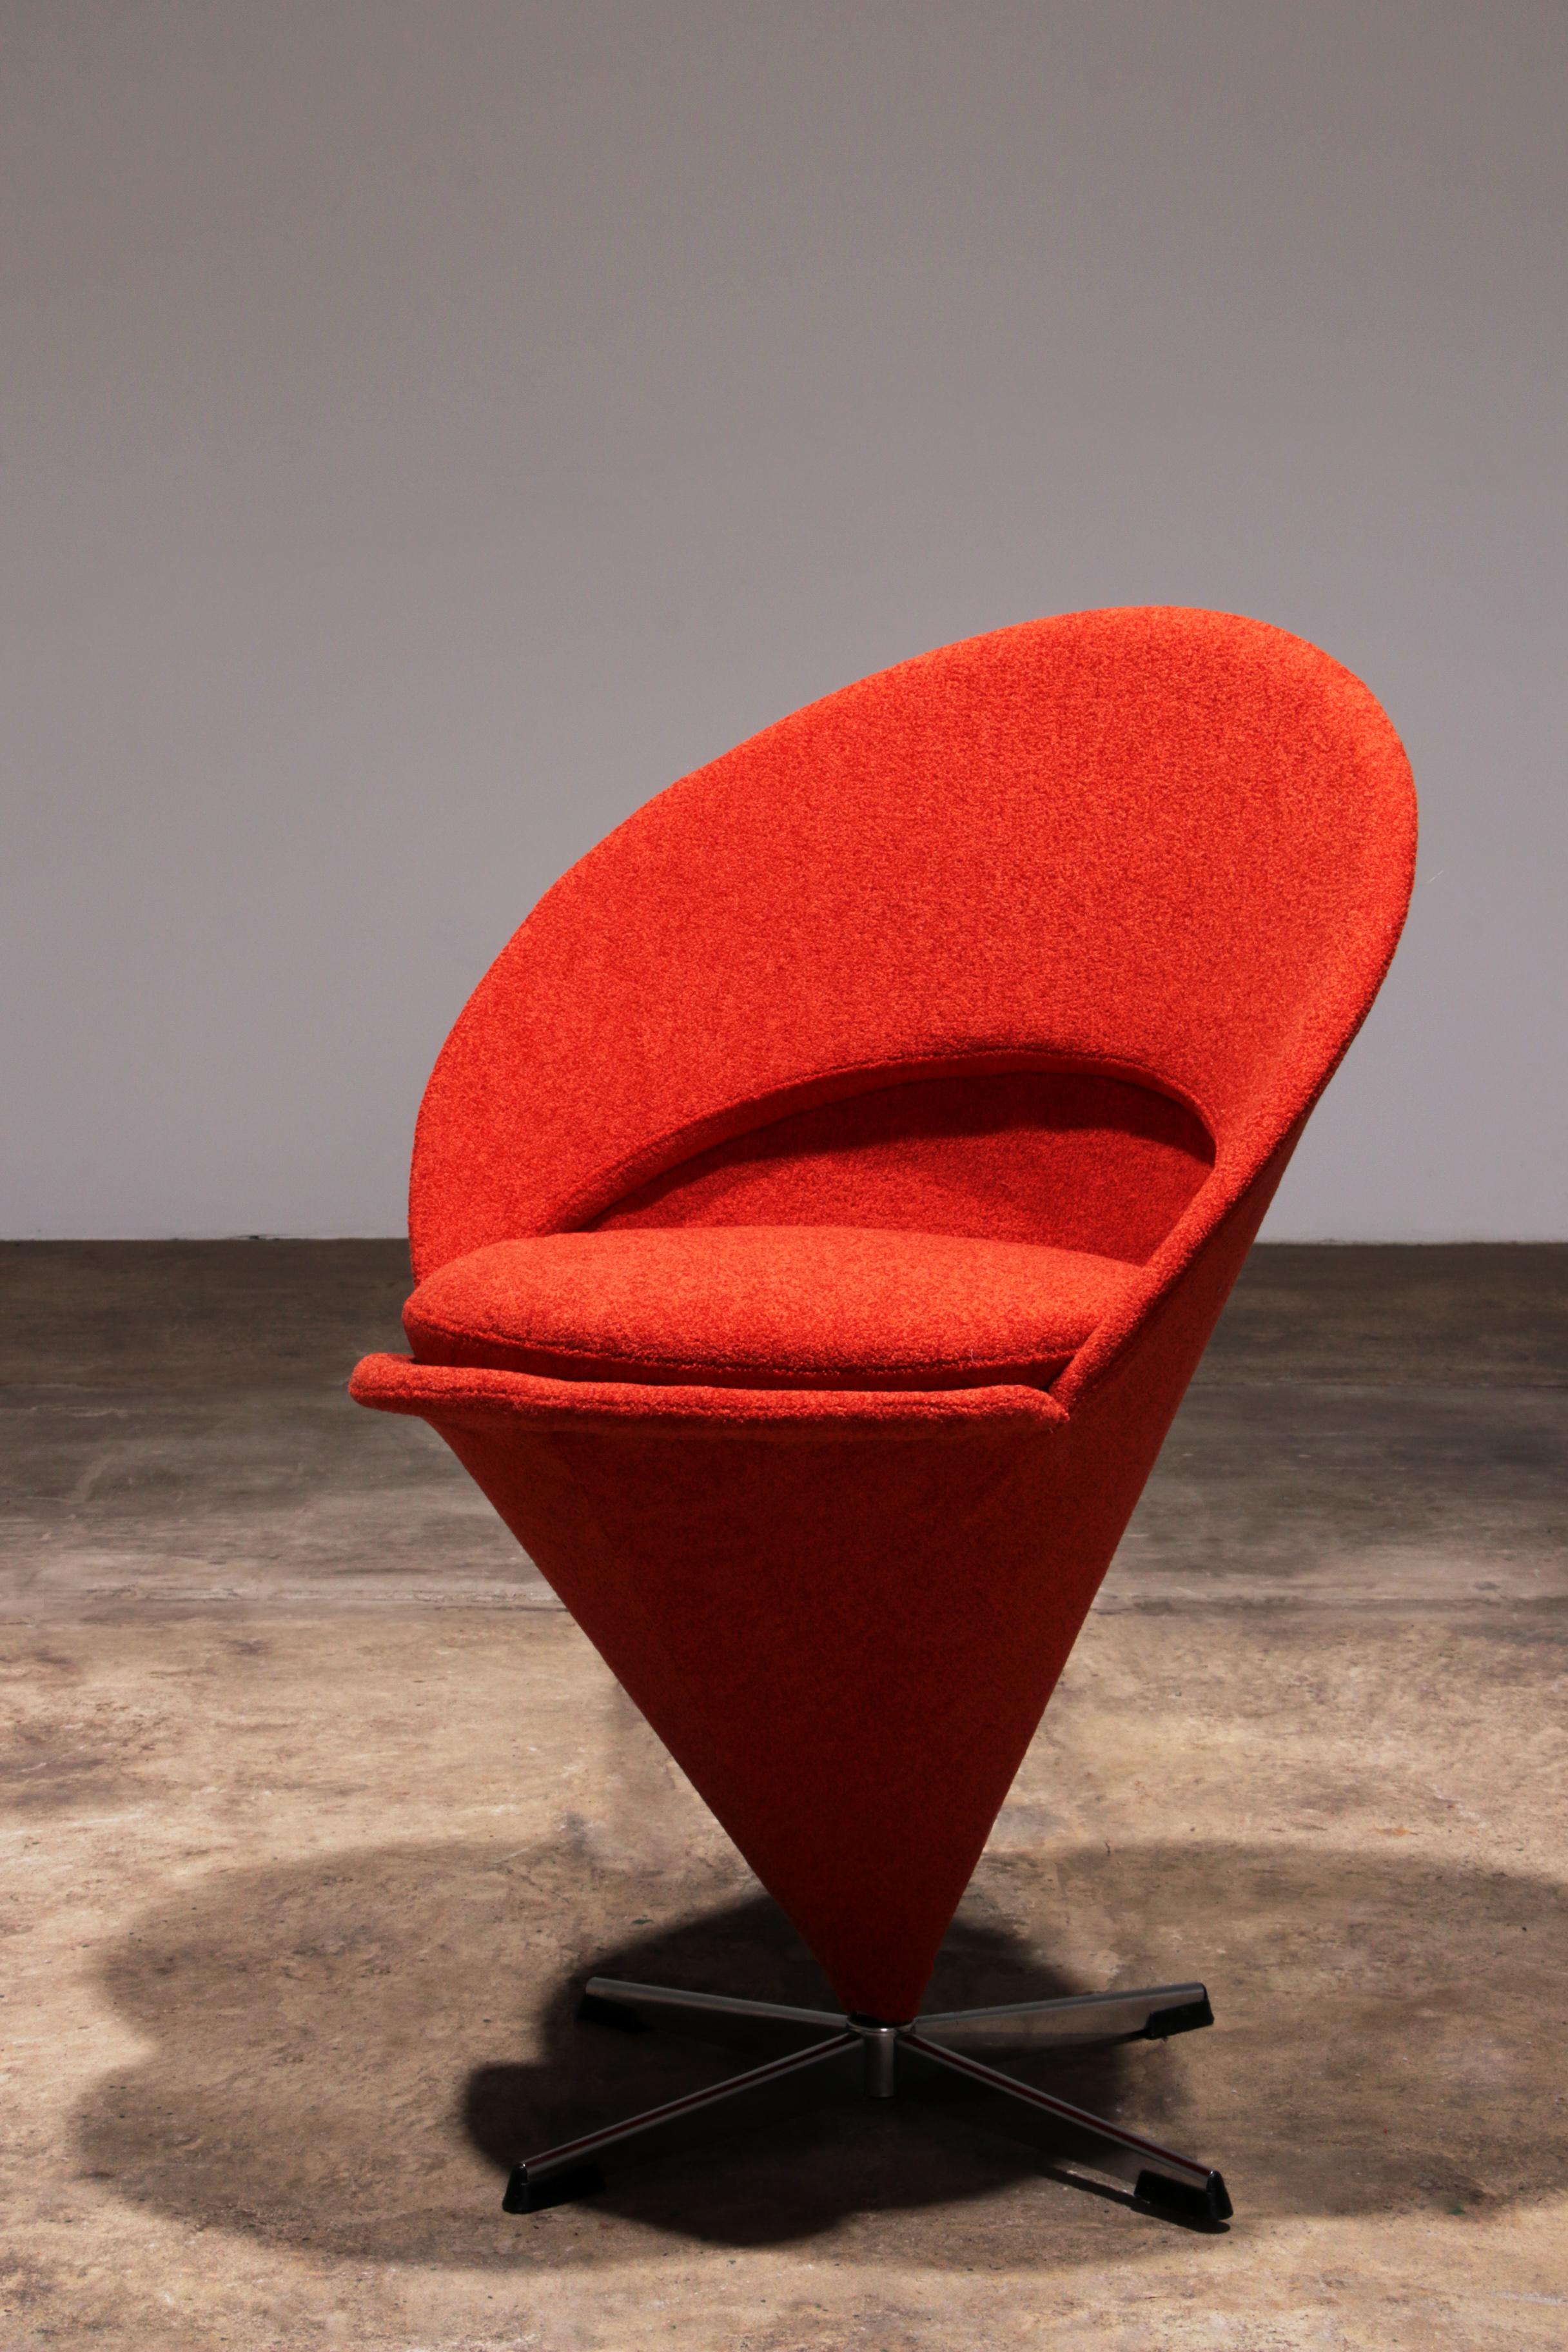 Verner Panton Model Cone K1 Chair from Timeless Design Classic 2